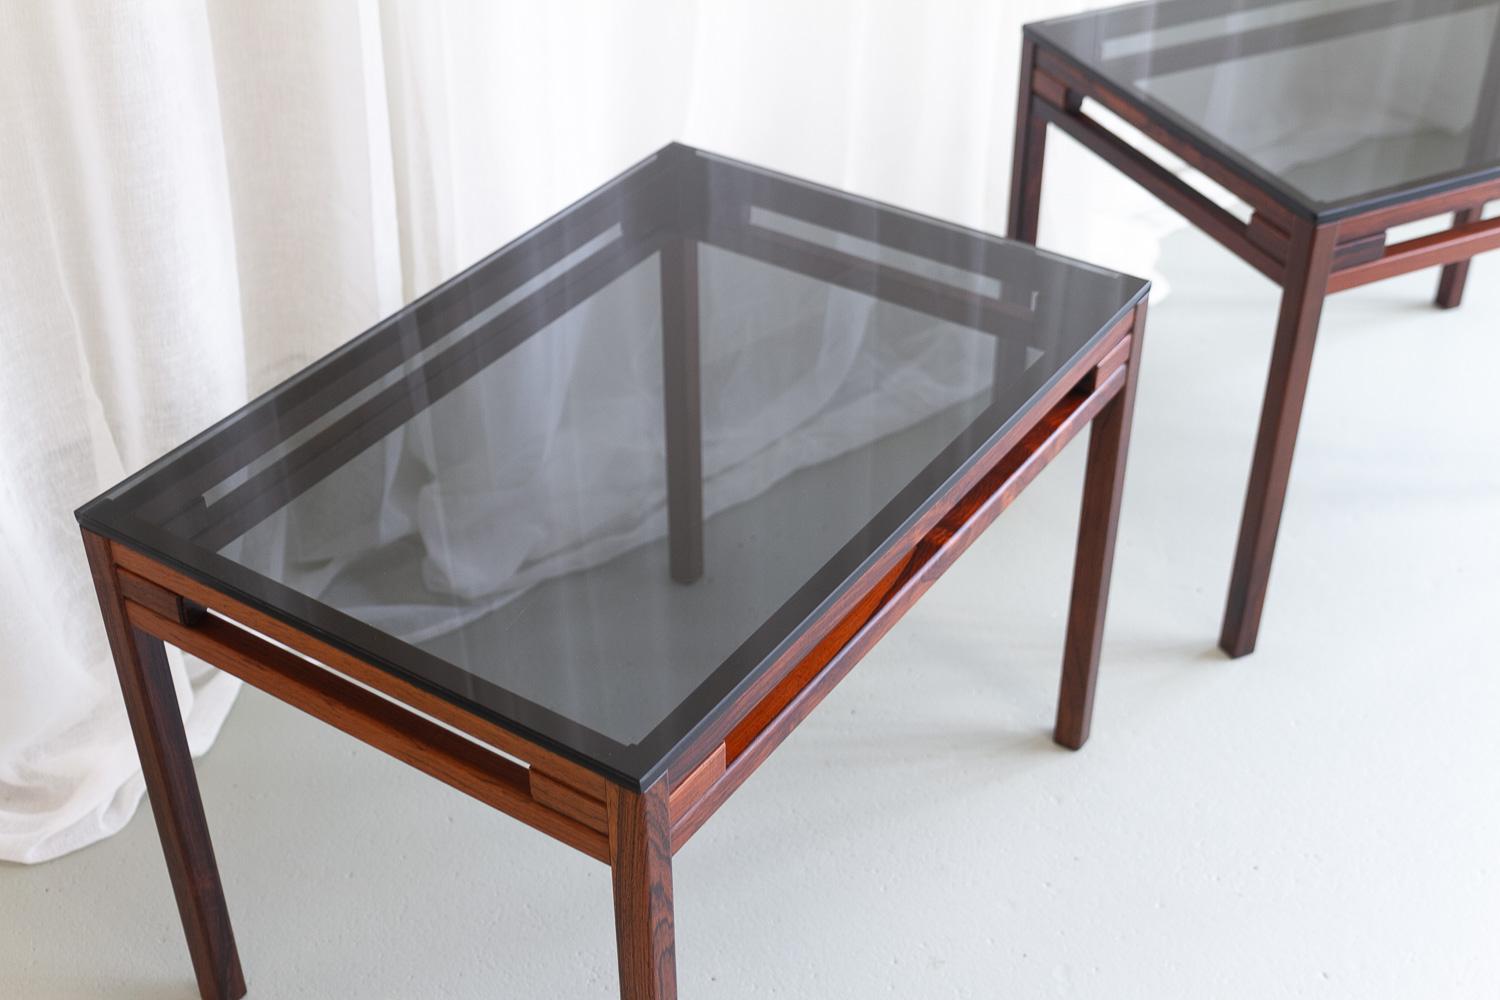 Danish Modern Side Tables in Rosewood and Glass, 1960s. Set of 2. For Sale 1